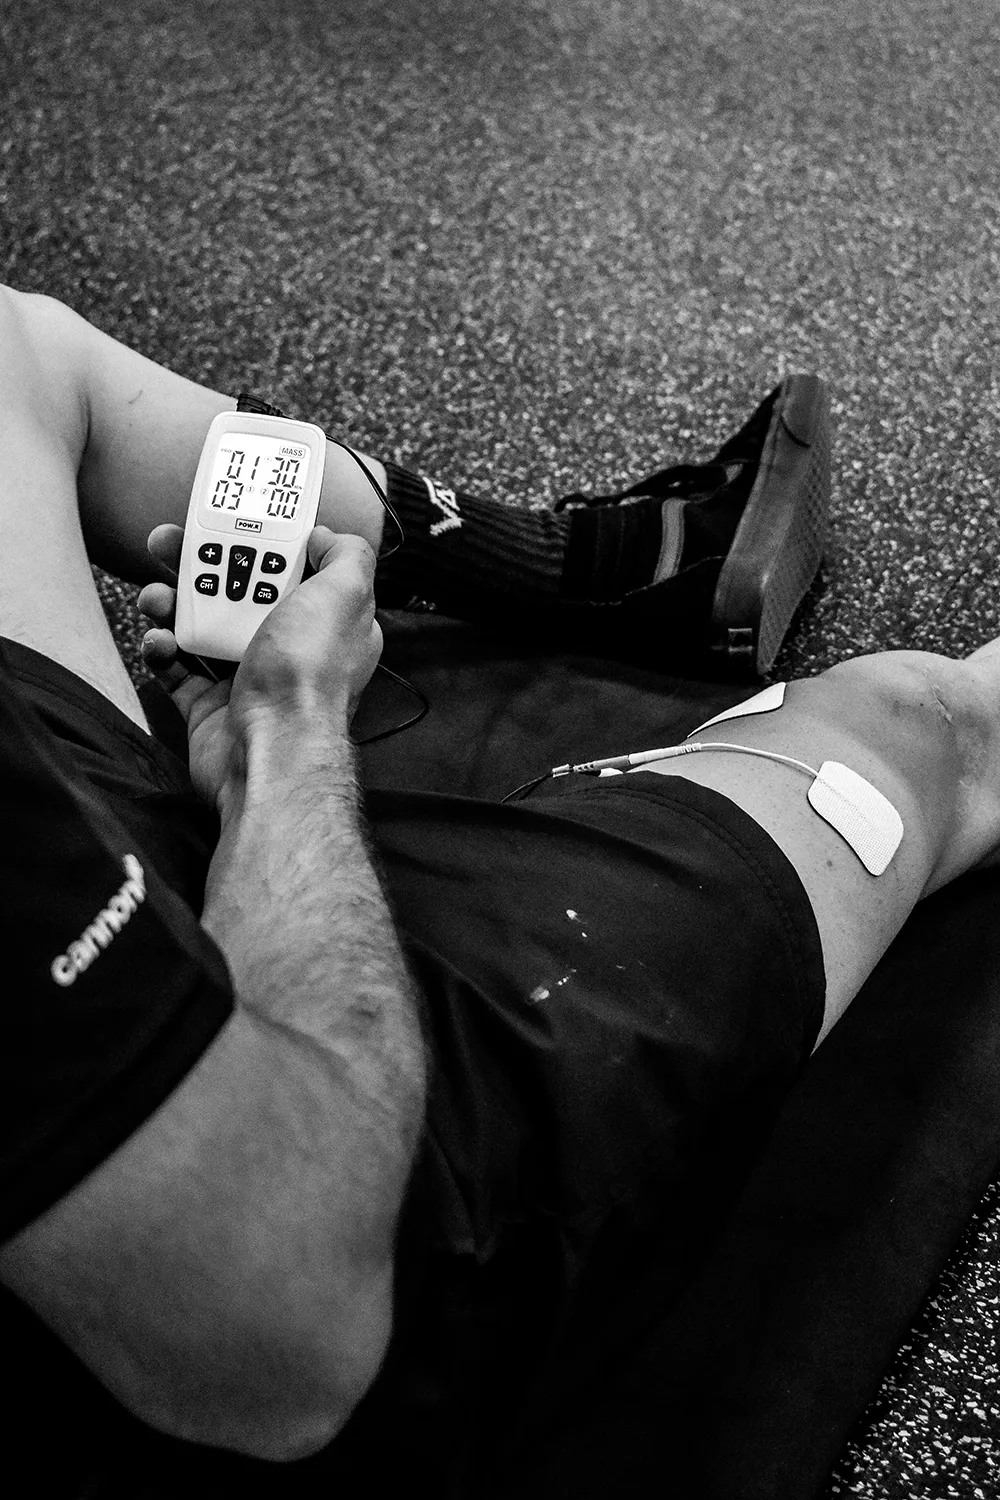 Using a TENS/EMS machine with electrodes